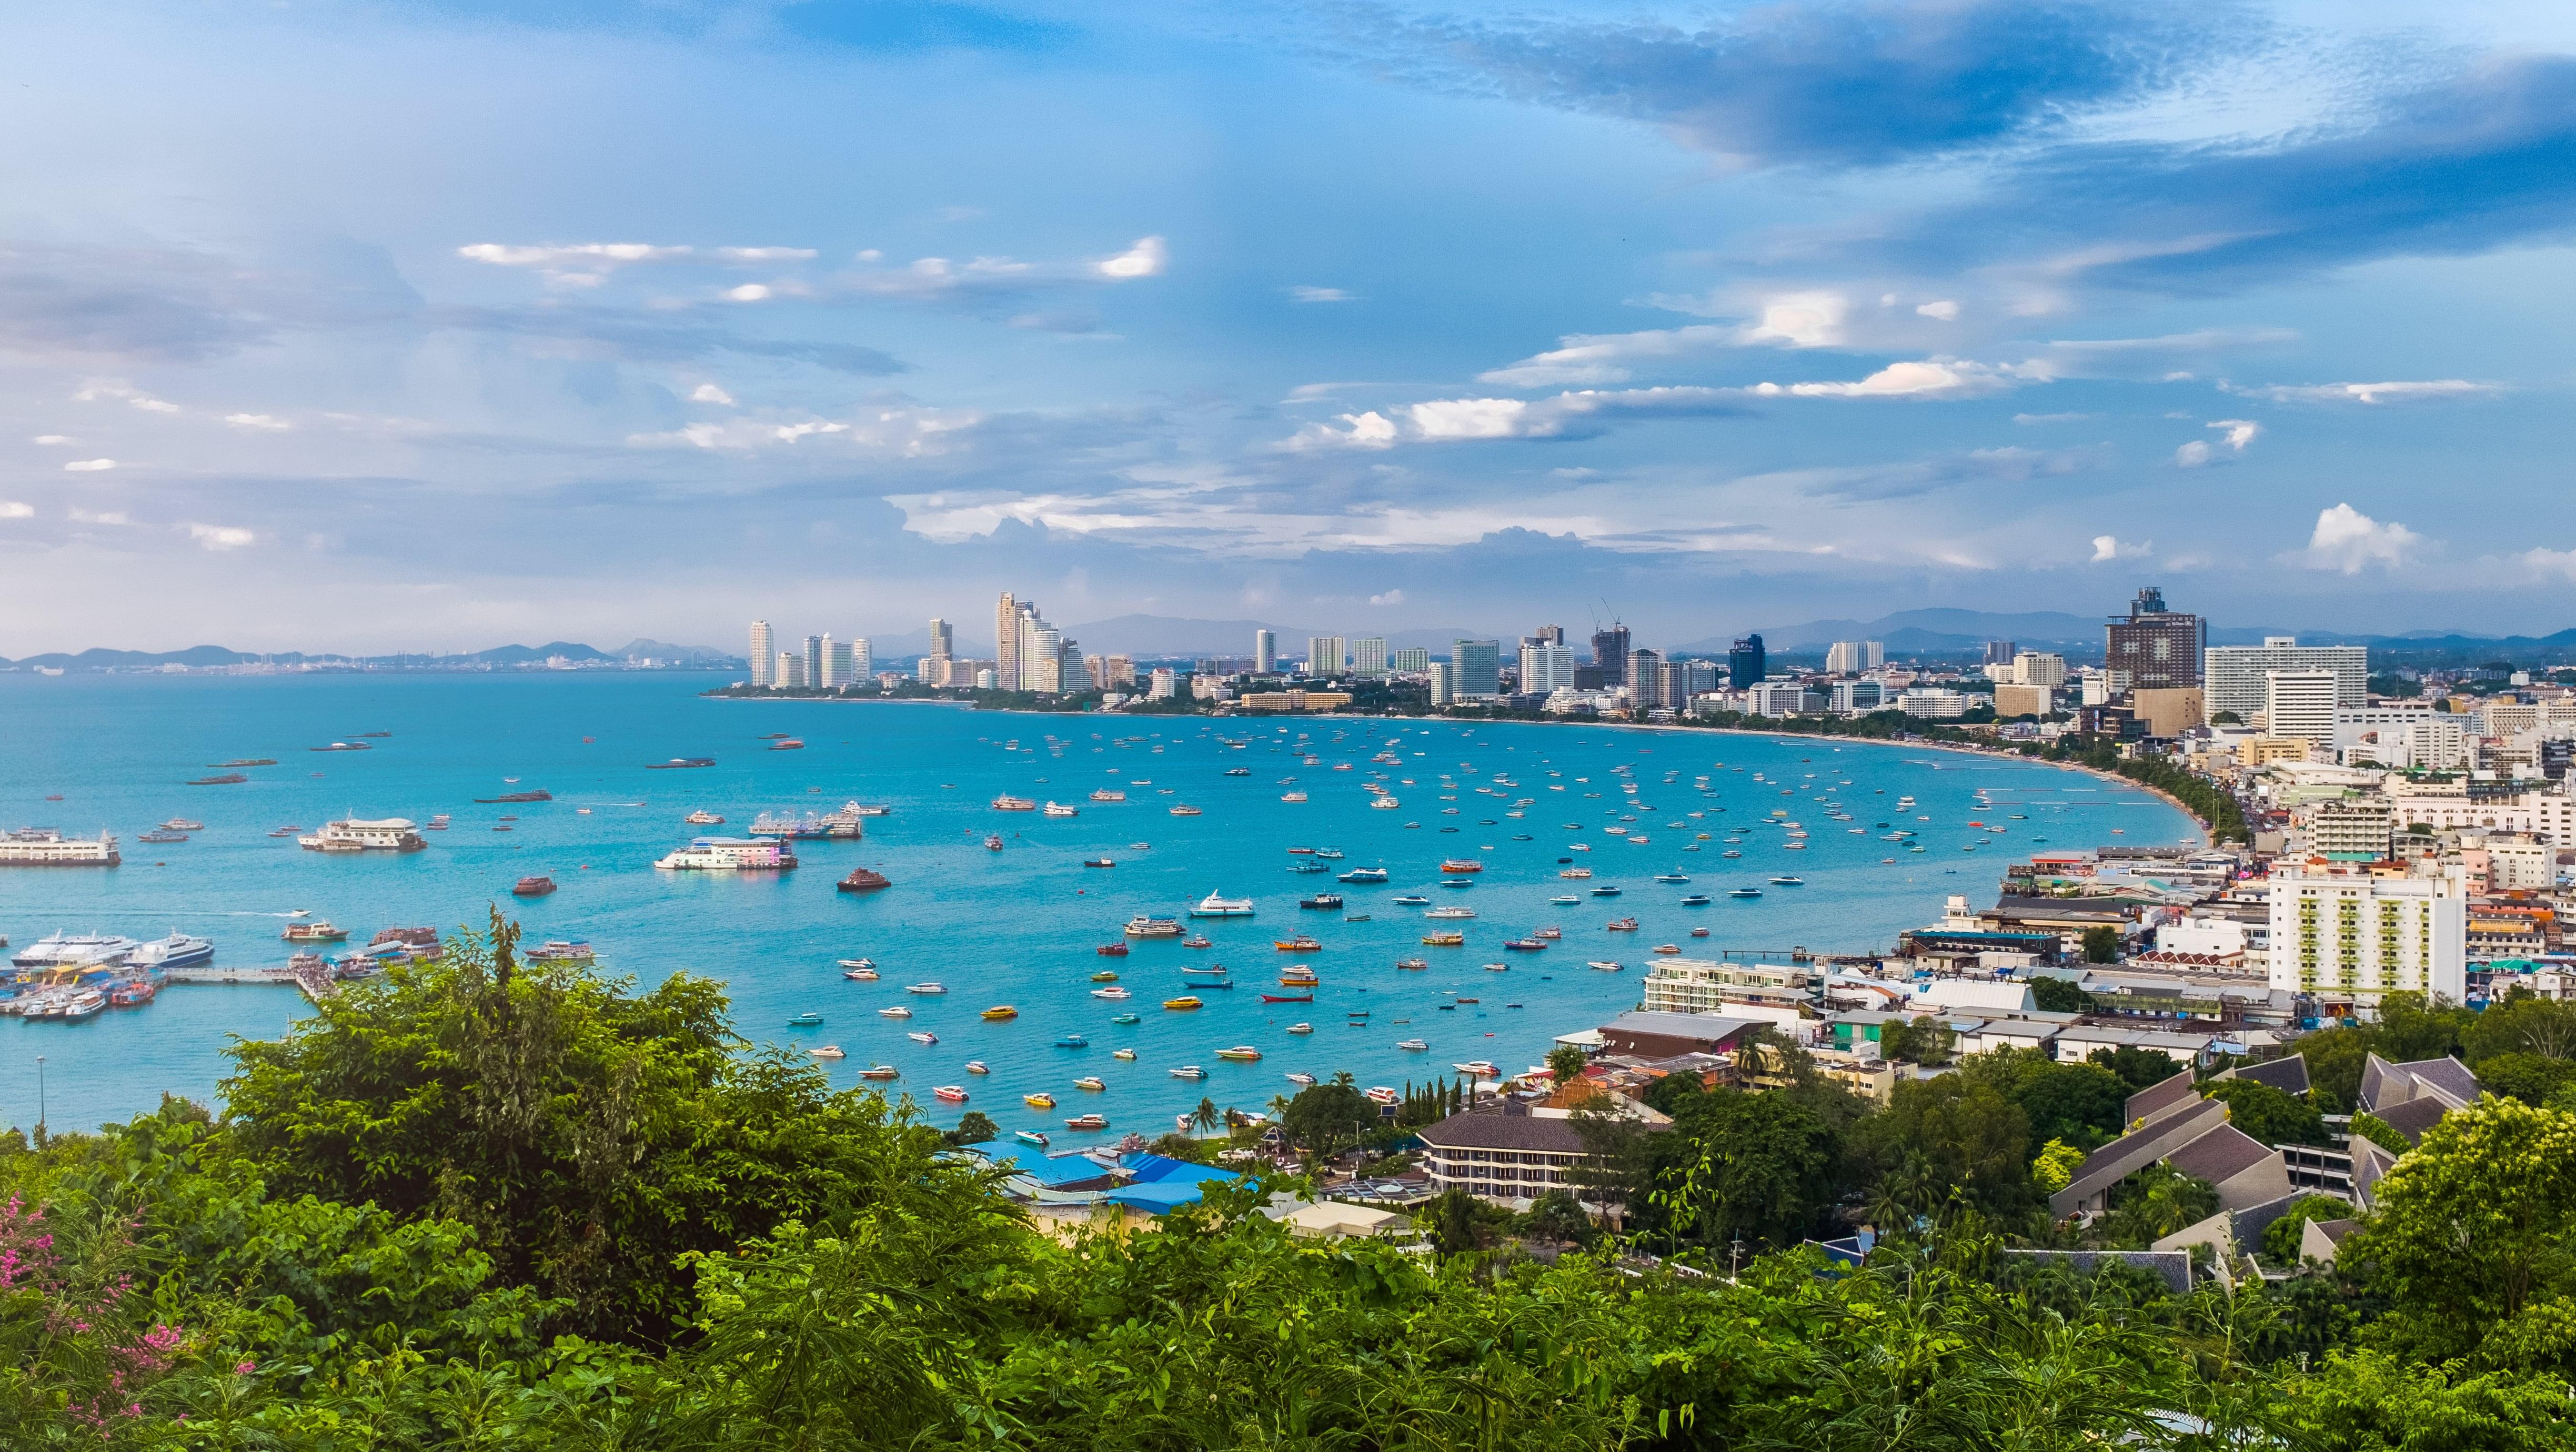 Pattaya Tour Packages | Upto 50% Off March Mega SALE